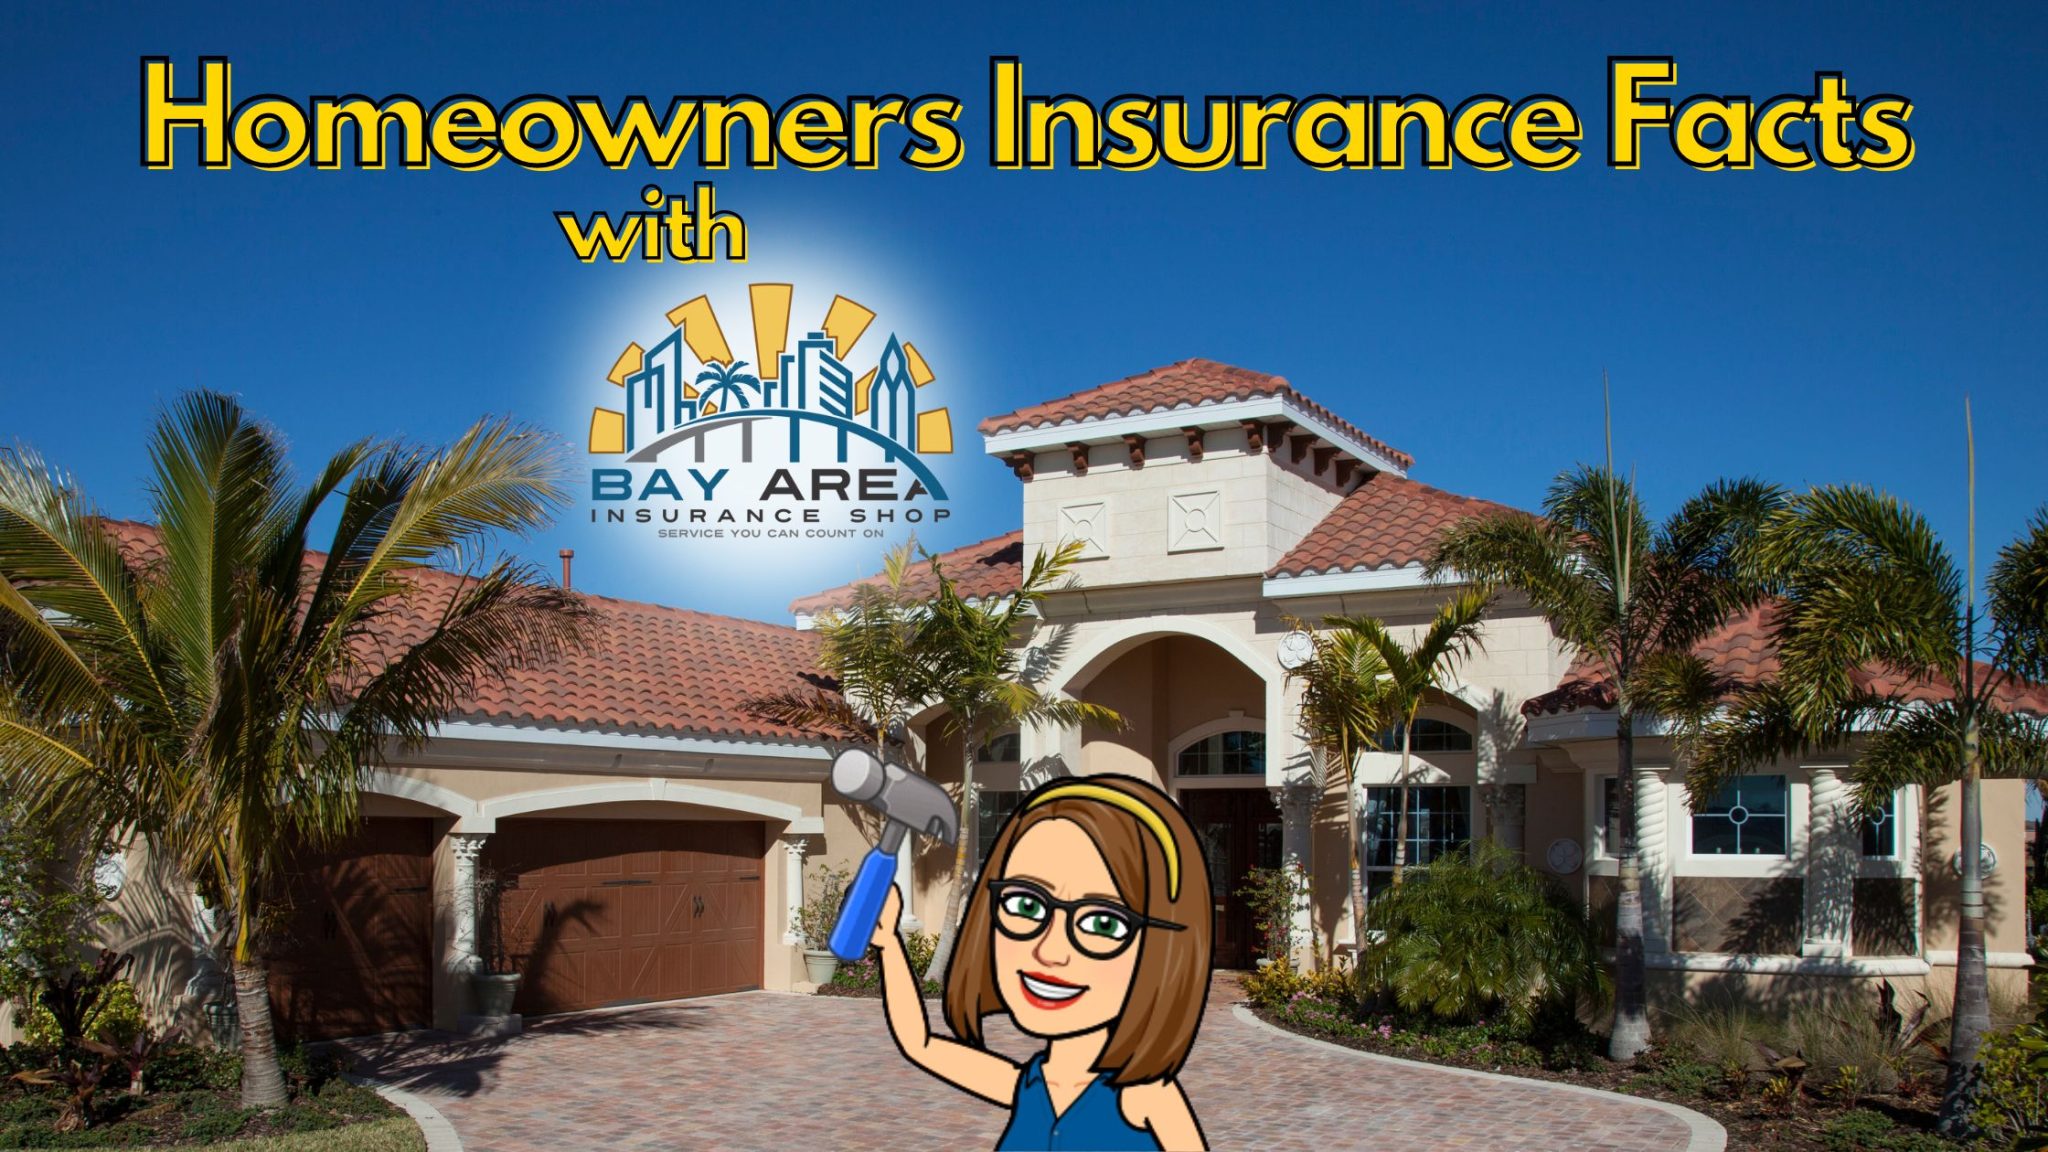 homeowners-insurance-facts-bay-area-insurance-shop